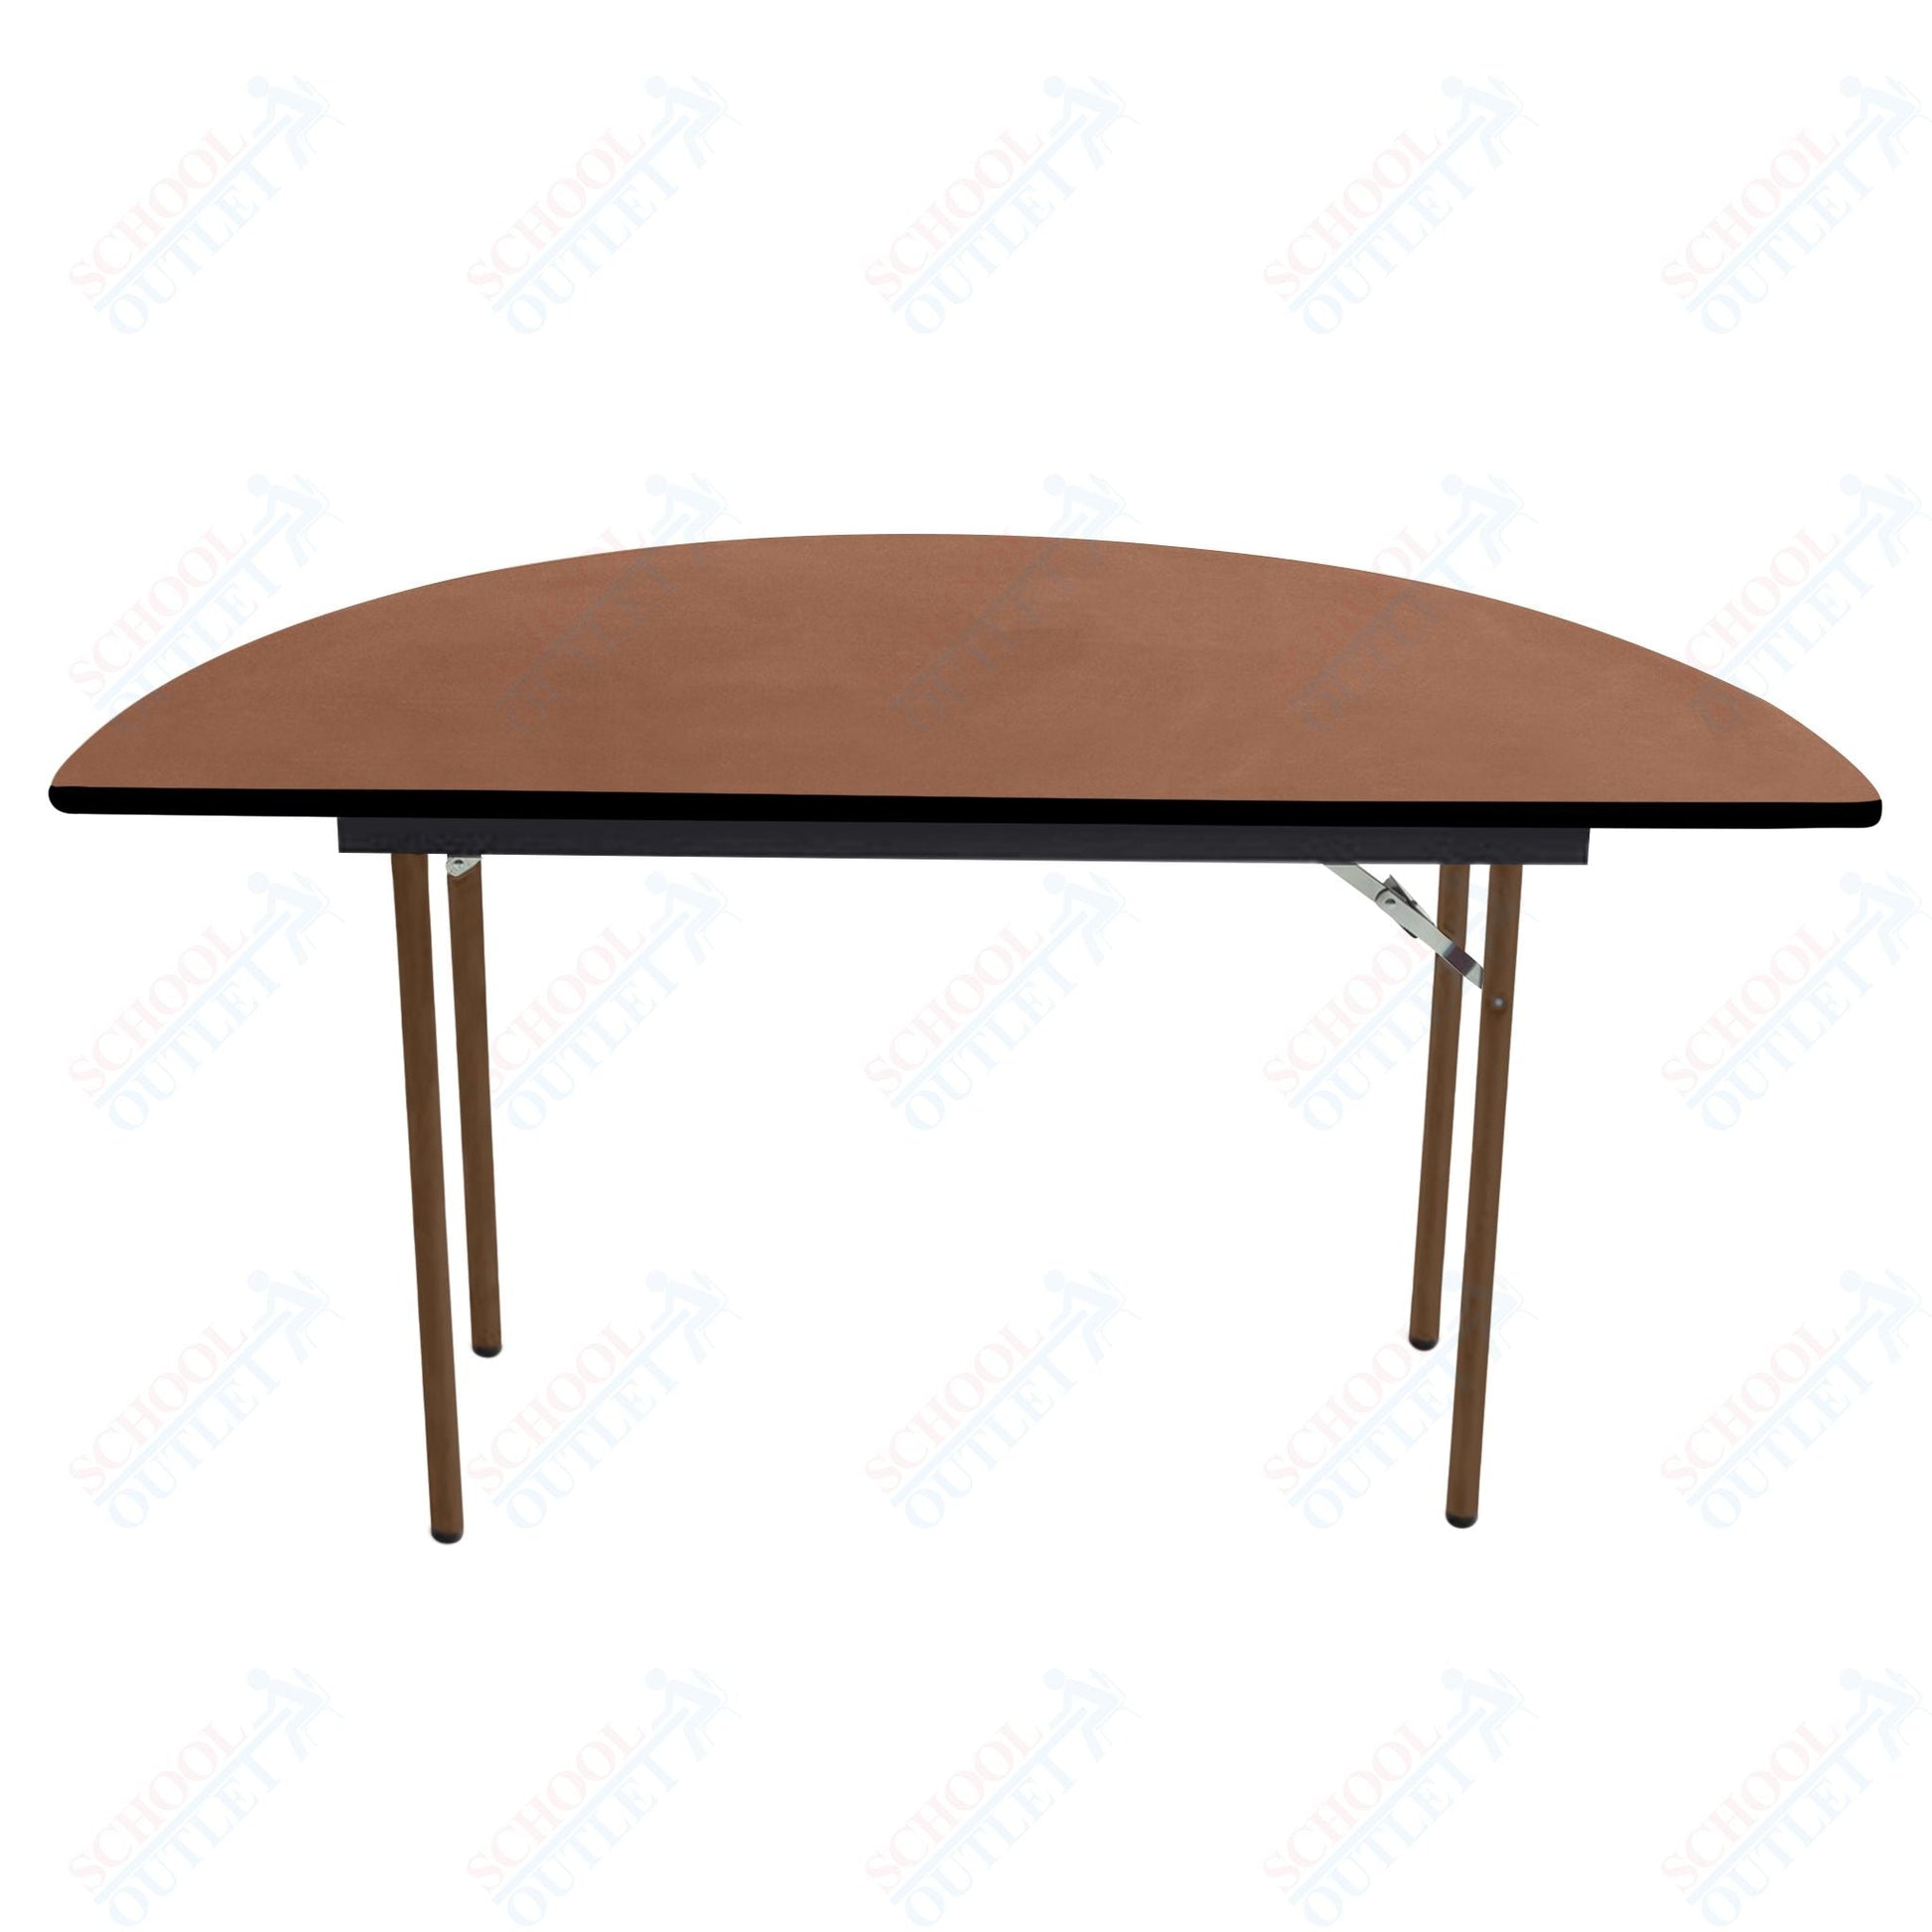 AmTab Folding Table - Plywood Stained and Sealed - Vinyl T - Molding Edge - Half Round - Half 48" Diameter x 29"H (AmTab AMT - HR48PM) - SchoolOutlet